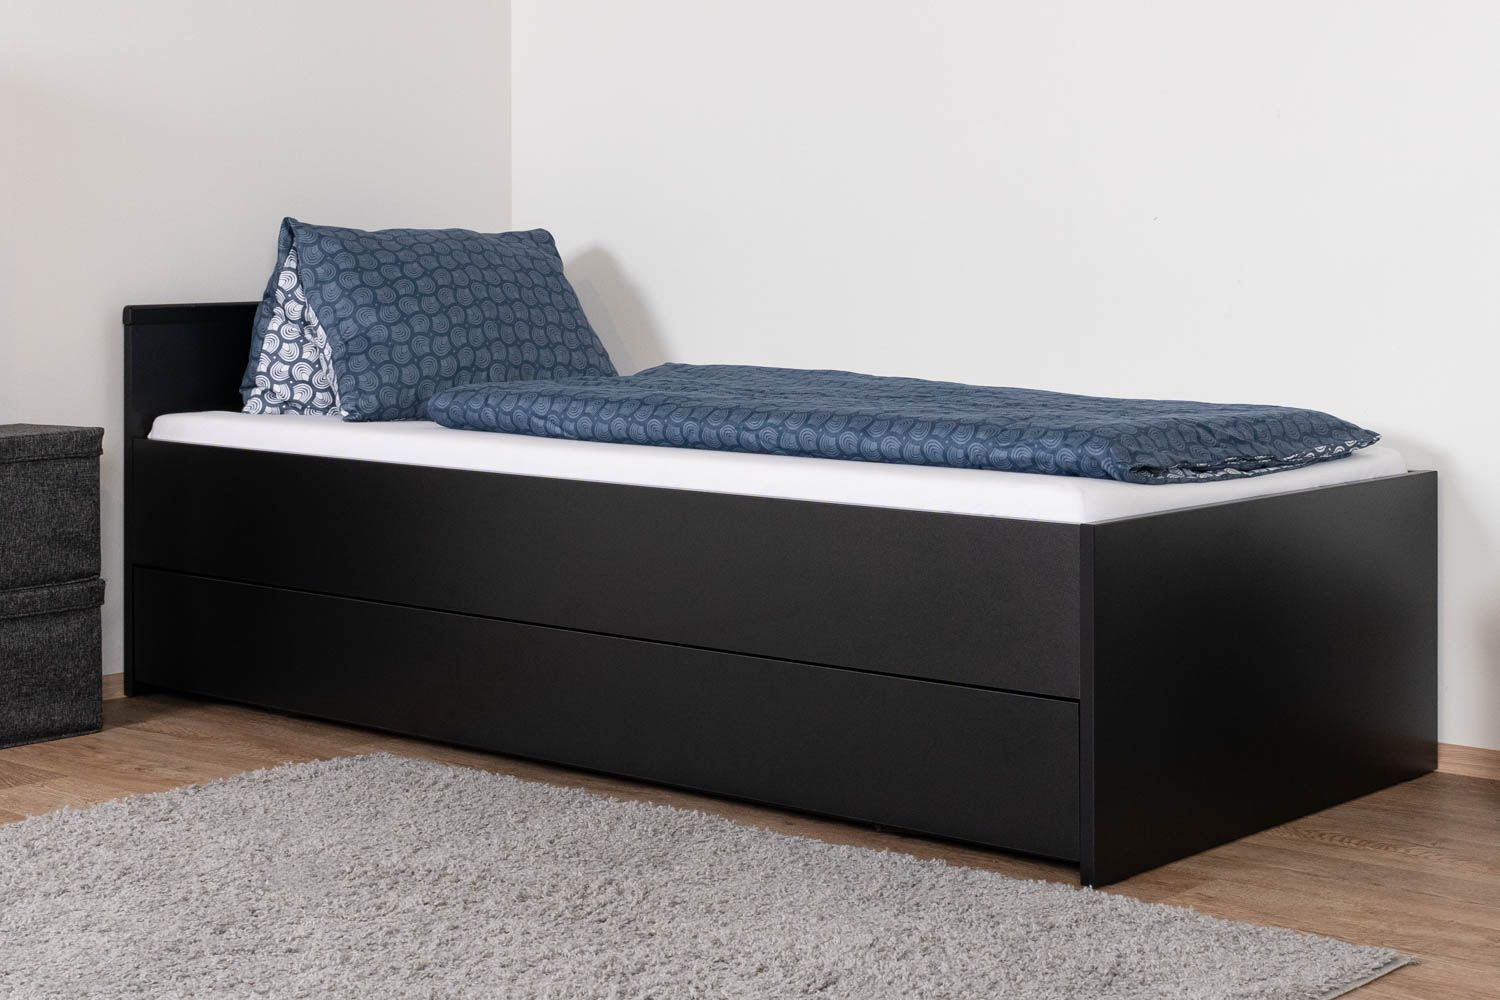 Children's bed / Kid bed Marincho 81 incl. 2nd berth, Colour: Black - Lying area: 90 x 200 cm